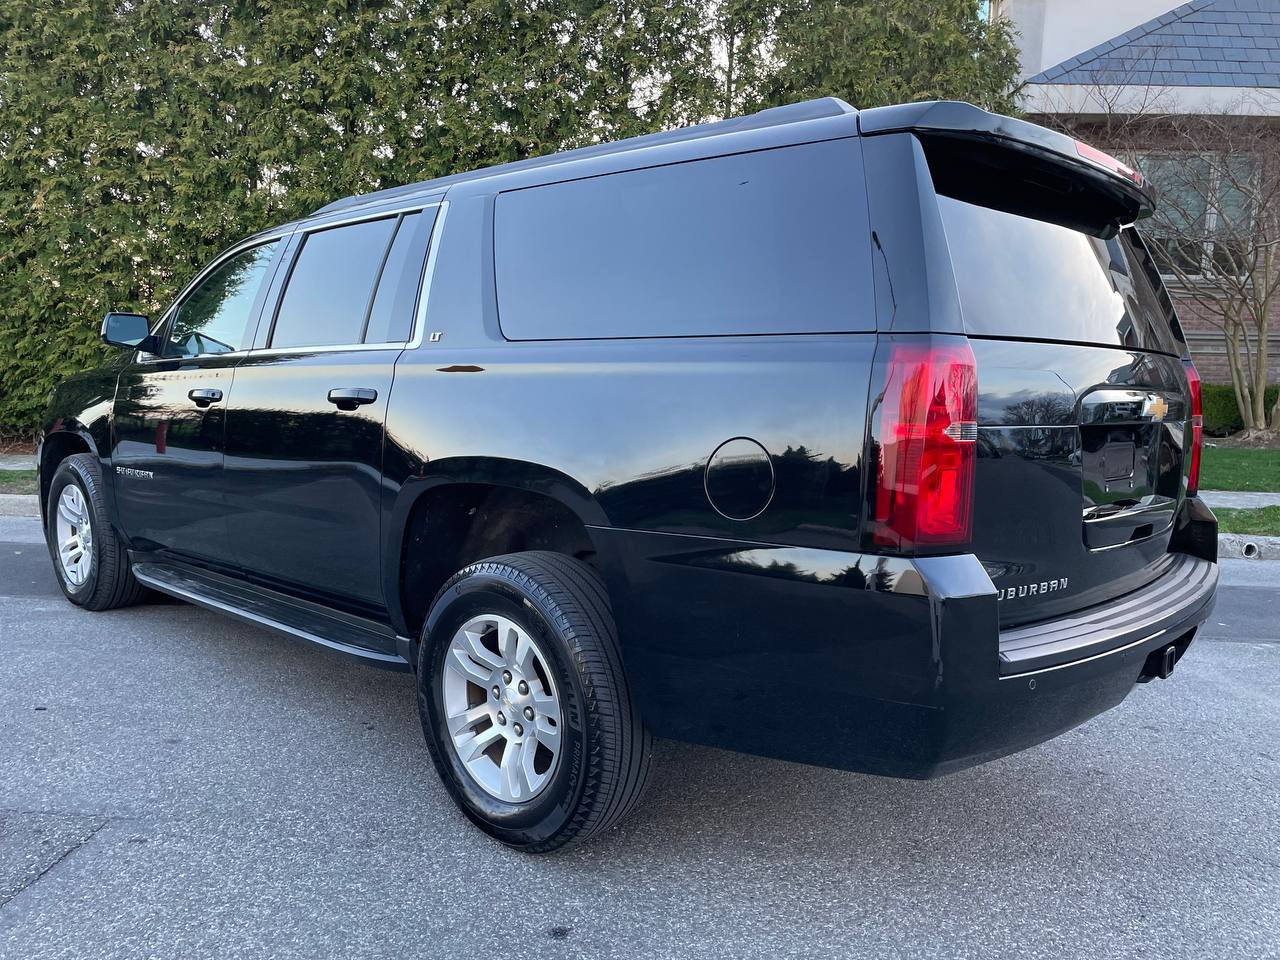 Used - Chevrolet Suburban LT SUV for sale in Staten Island NY